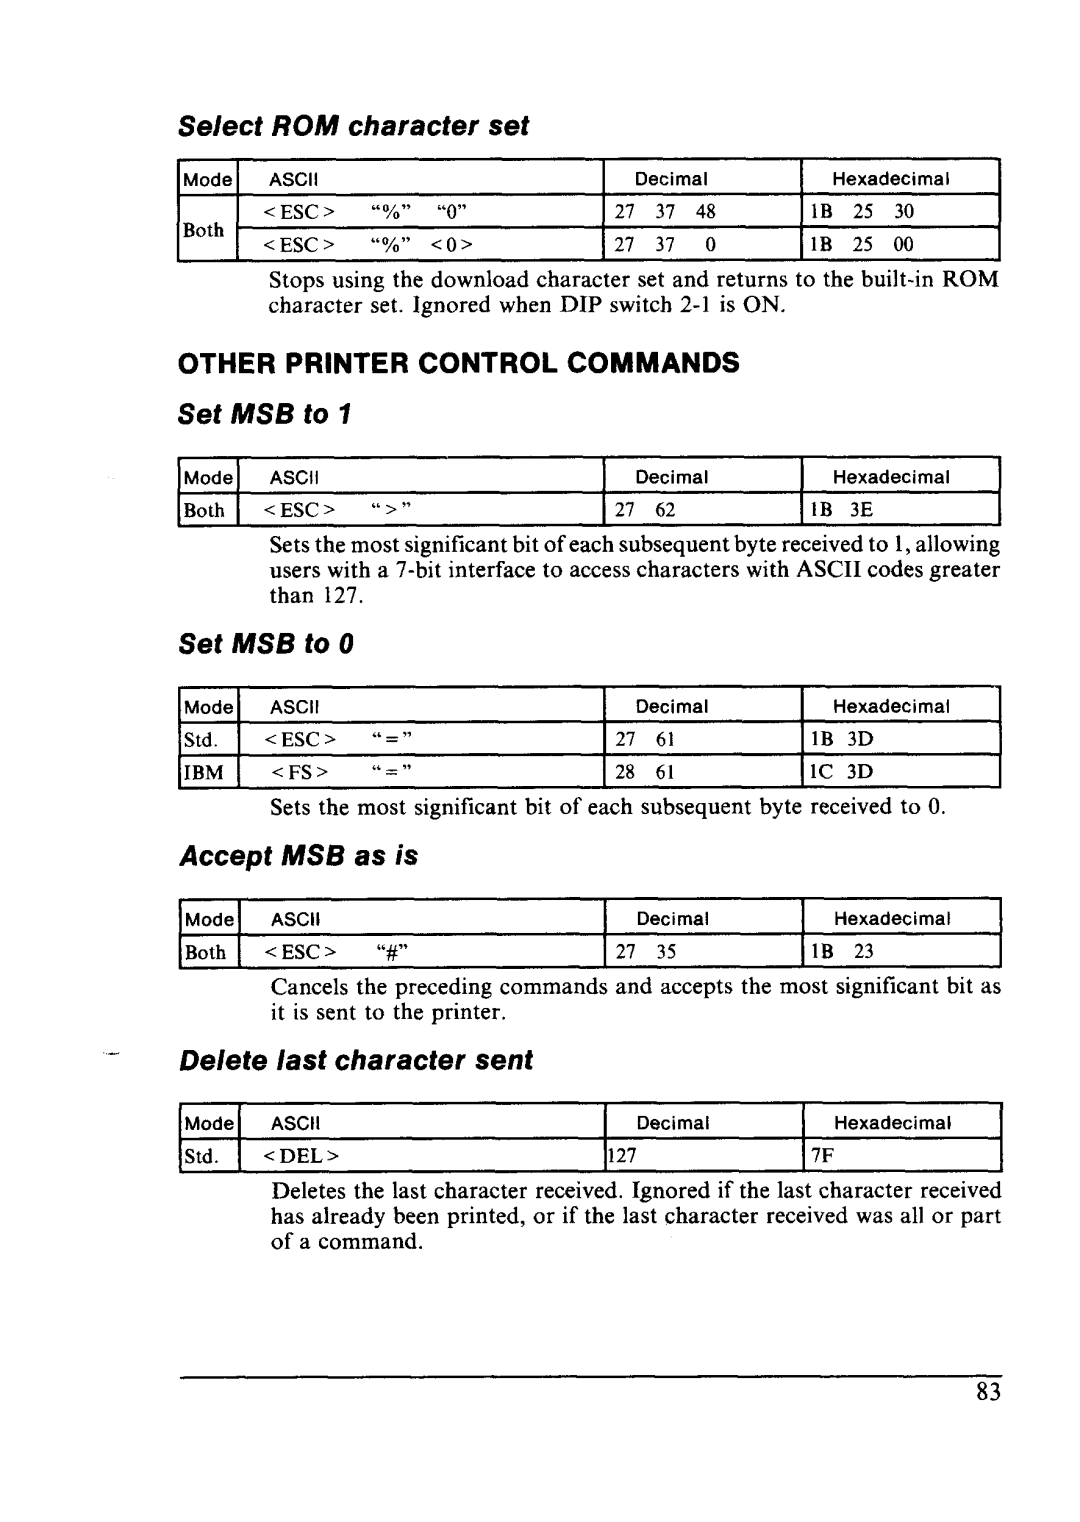 Star Micronics LC24-10 user manual Select ROM character, Set MSB to, Accept MSB as is, Delete last character sent 